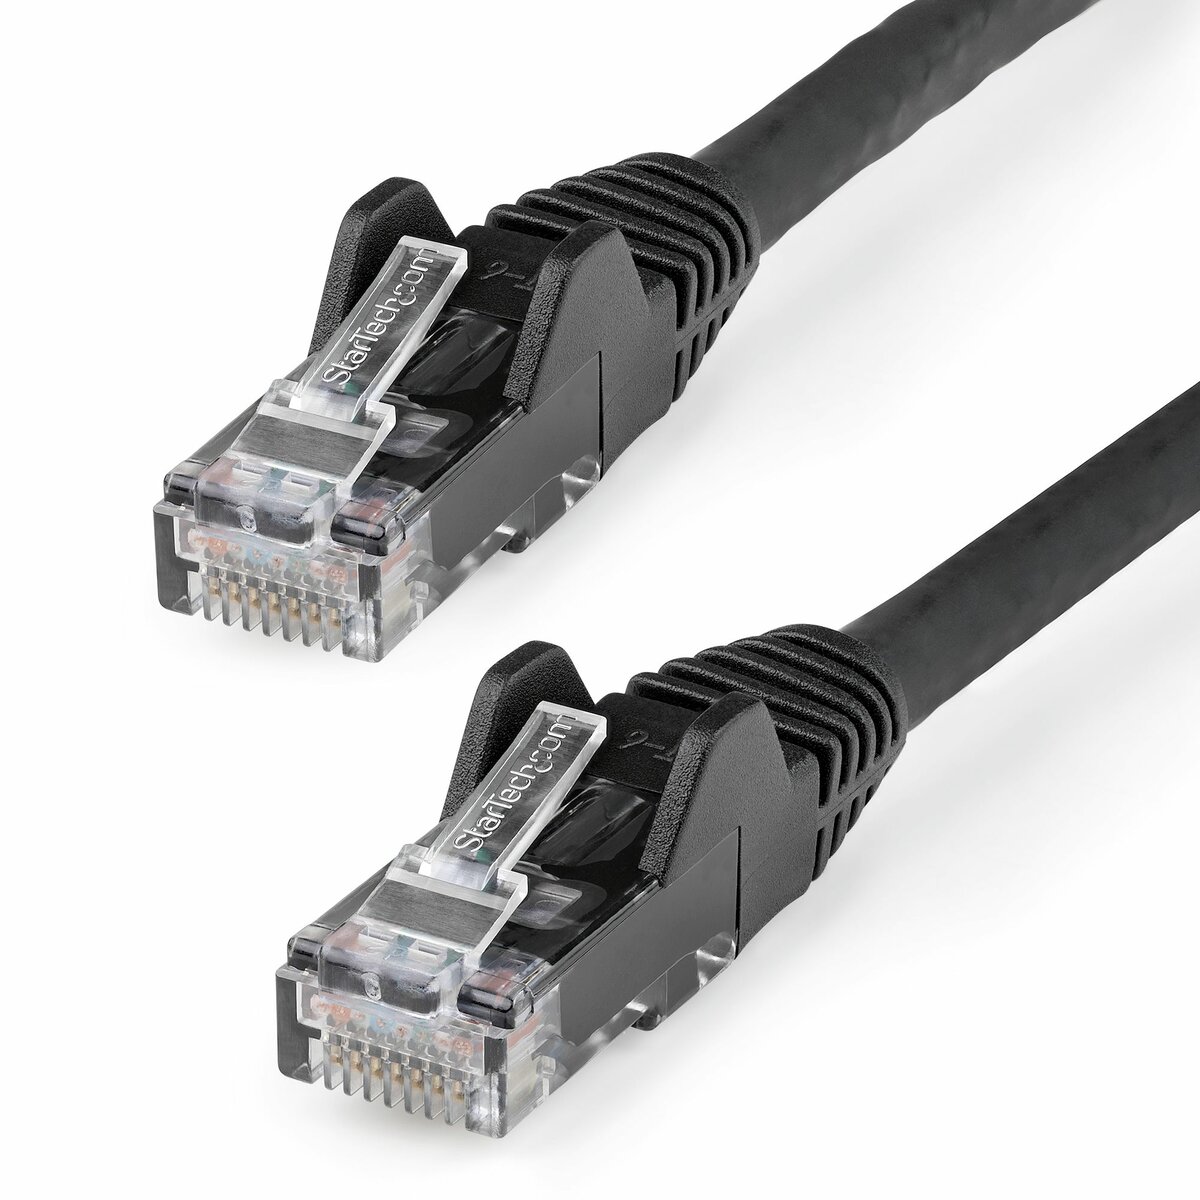 StarTech.com 35ft CAT6 Ethernet Cable - 10 Gigabit Snagless RJ45 650MHz  100W PoE Patch Cord - CAT 6 10GbE UTP Network Cable w/Strain Relief - Black  